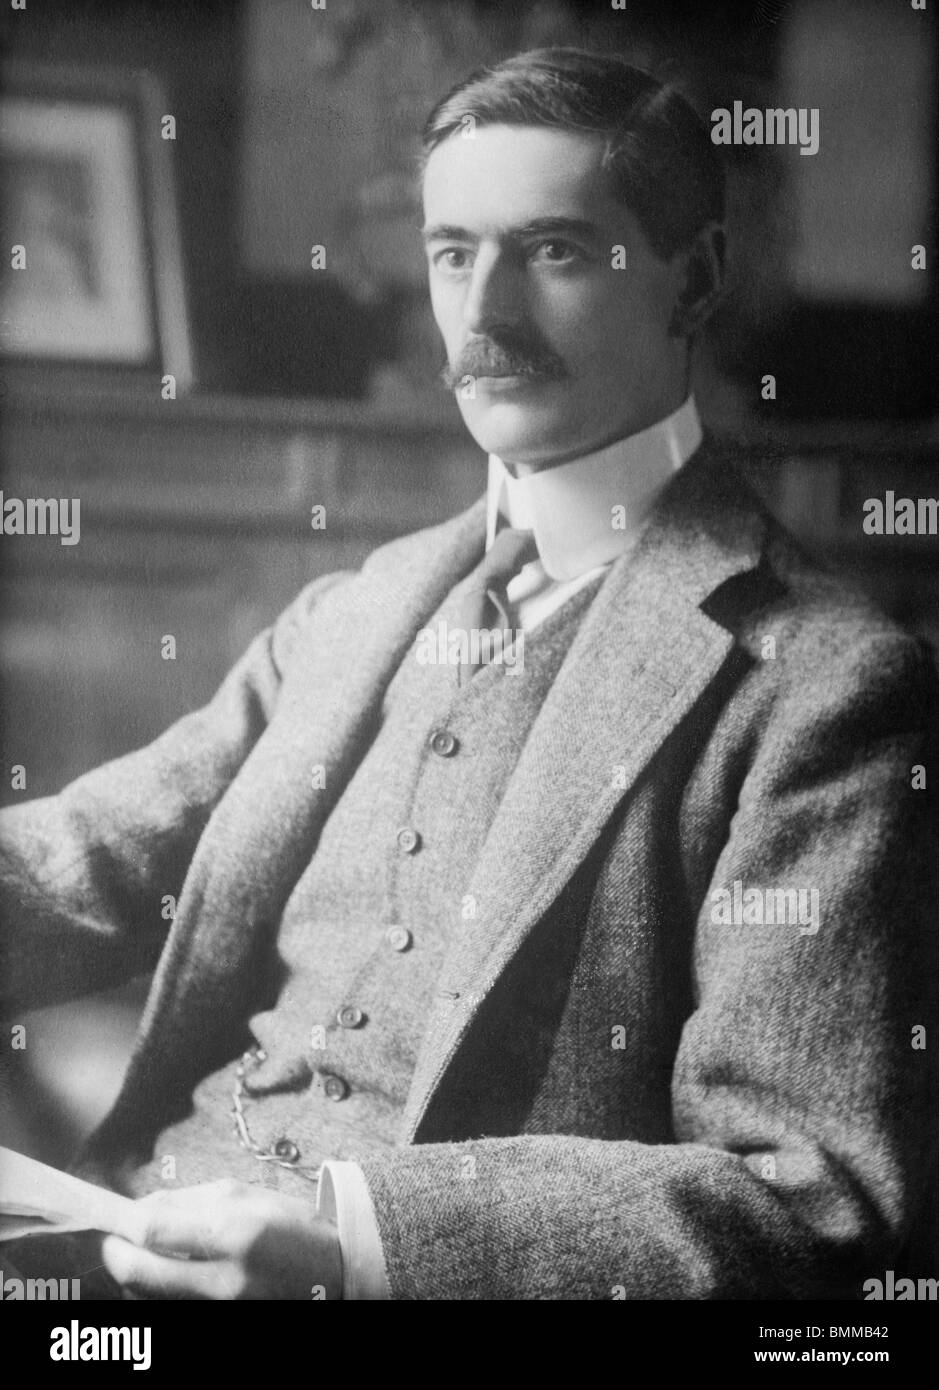 Undated portrait photo of Neville Chamberlain (1869 - 1940) - Conservative statesman and UK Prime Minister from 1937 to 1940. Stock Photo